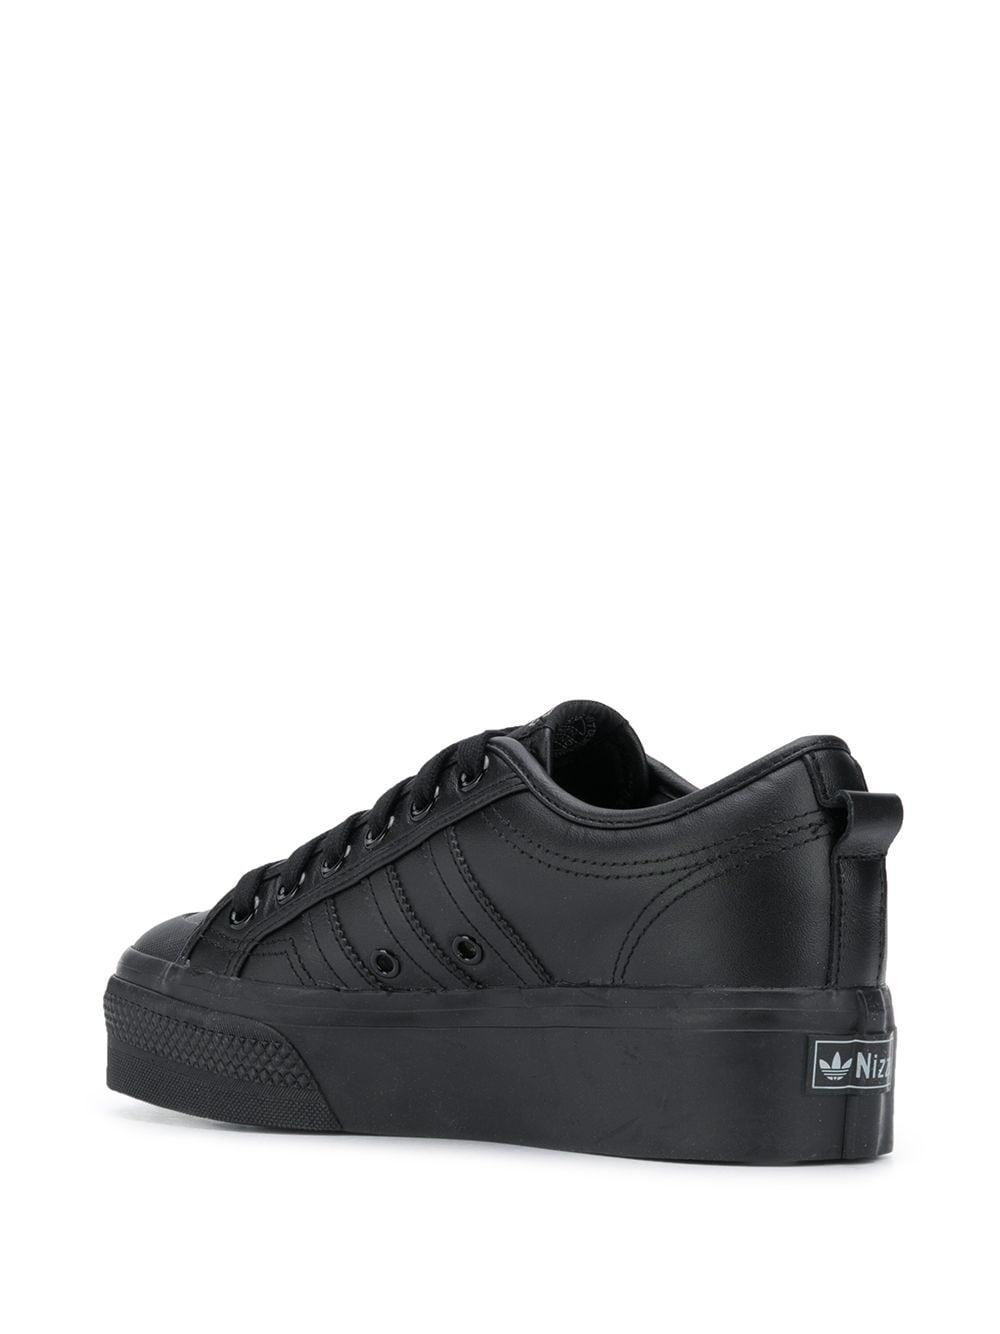 K-Swiss Classic Vintage Updated Iconic Tennis Sneaker Shoe - Black/Whi -  Shoplifestyle